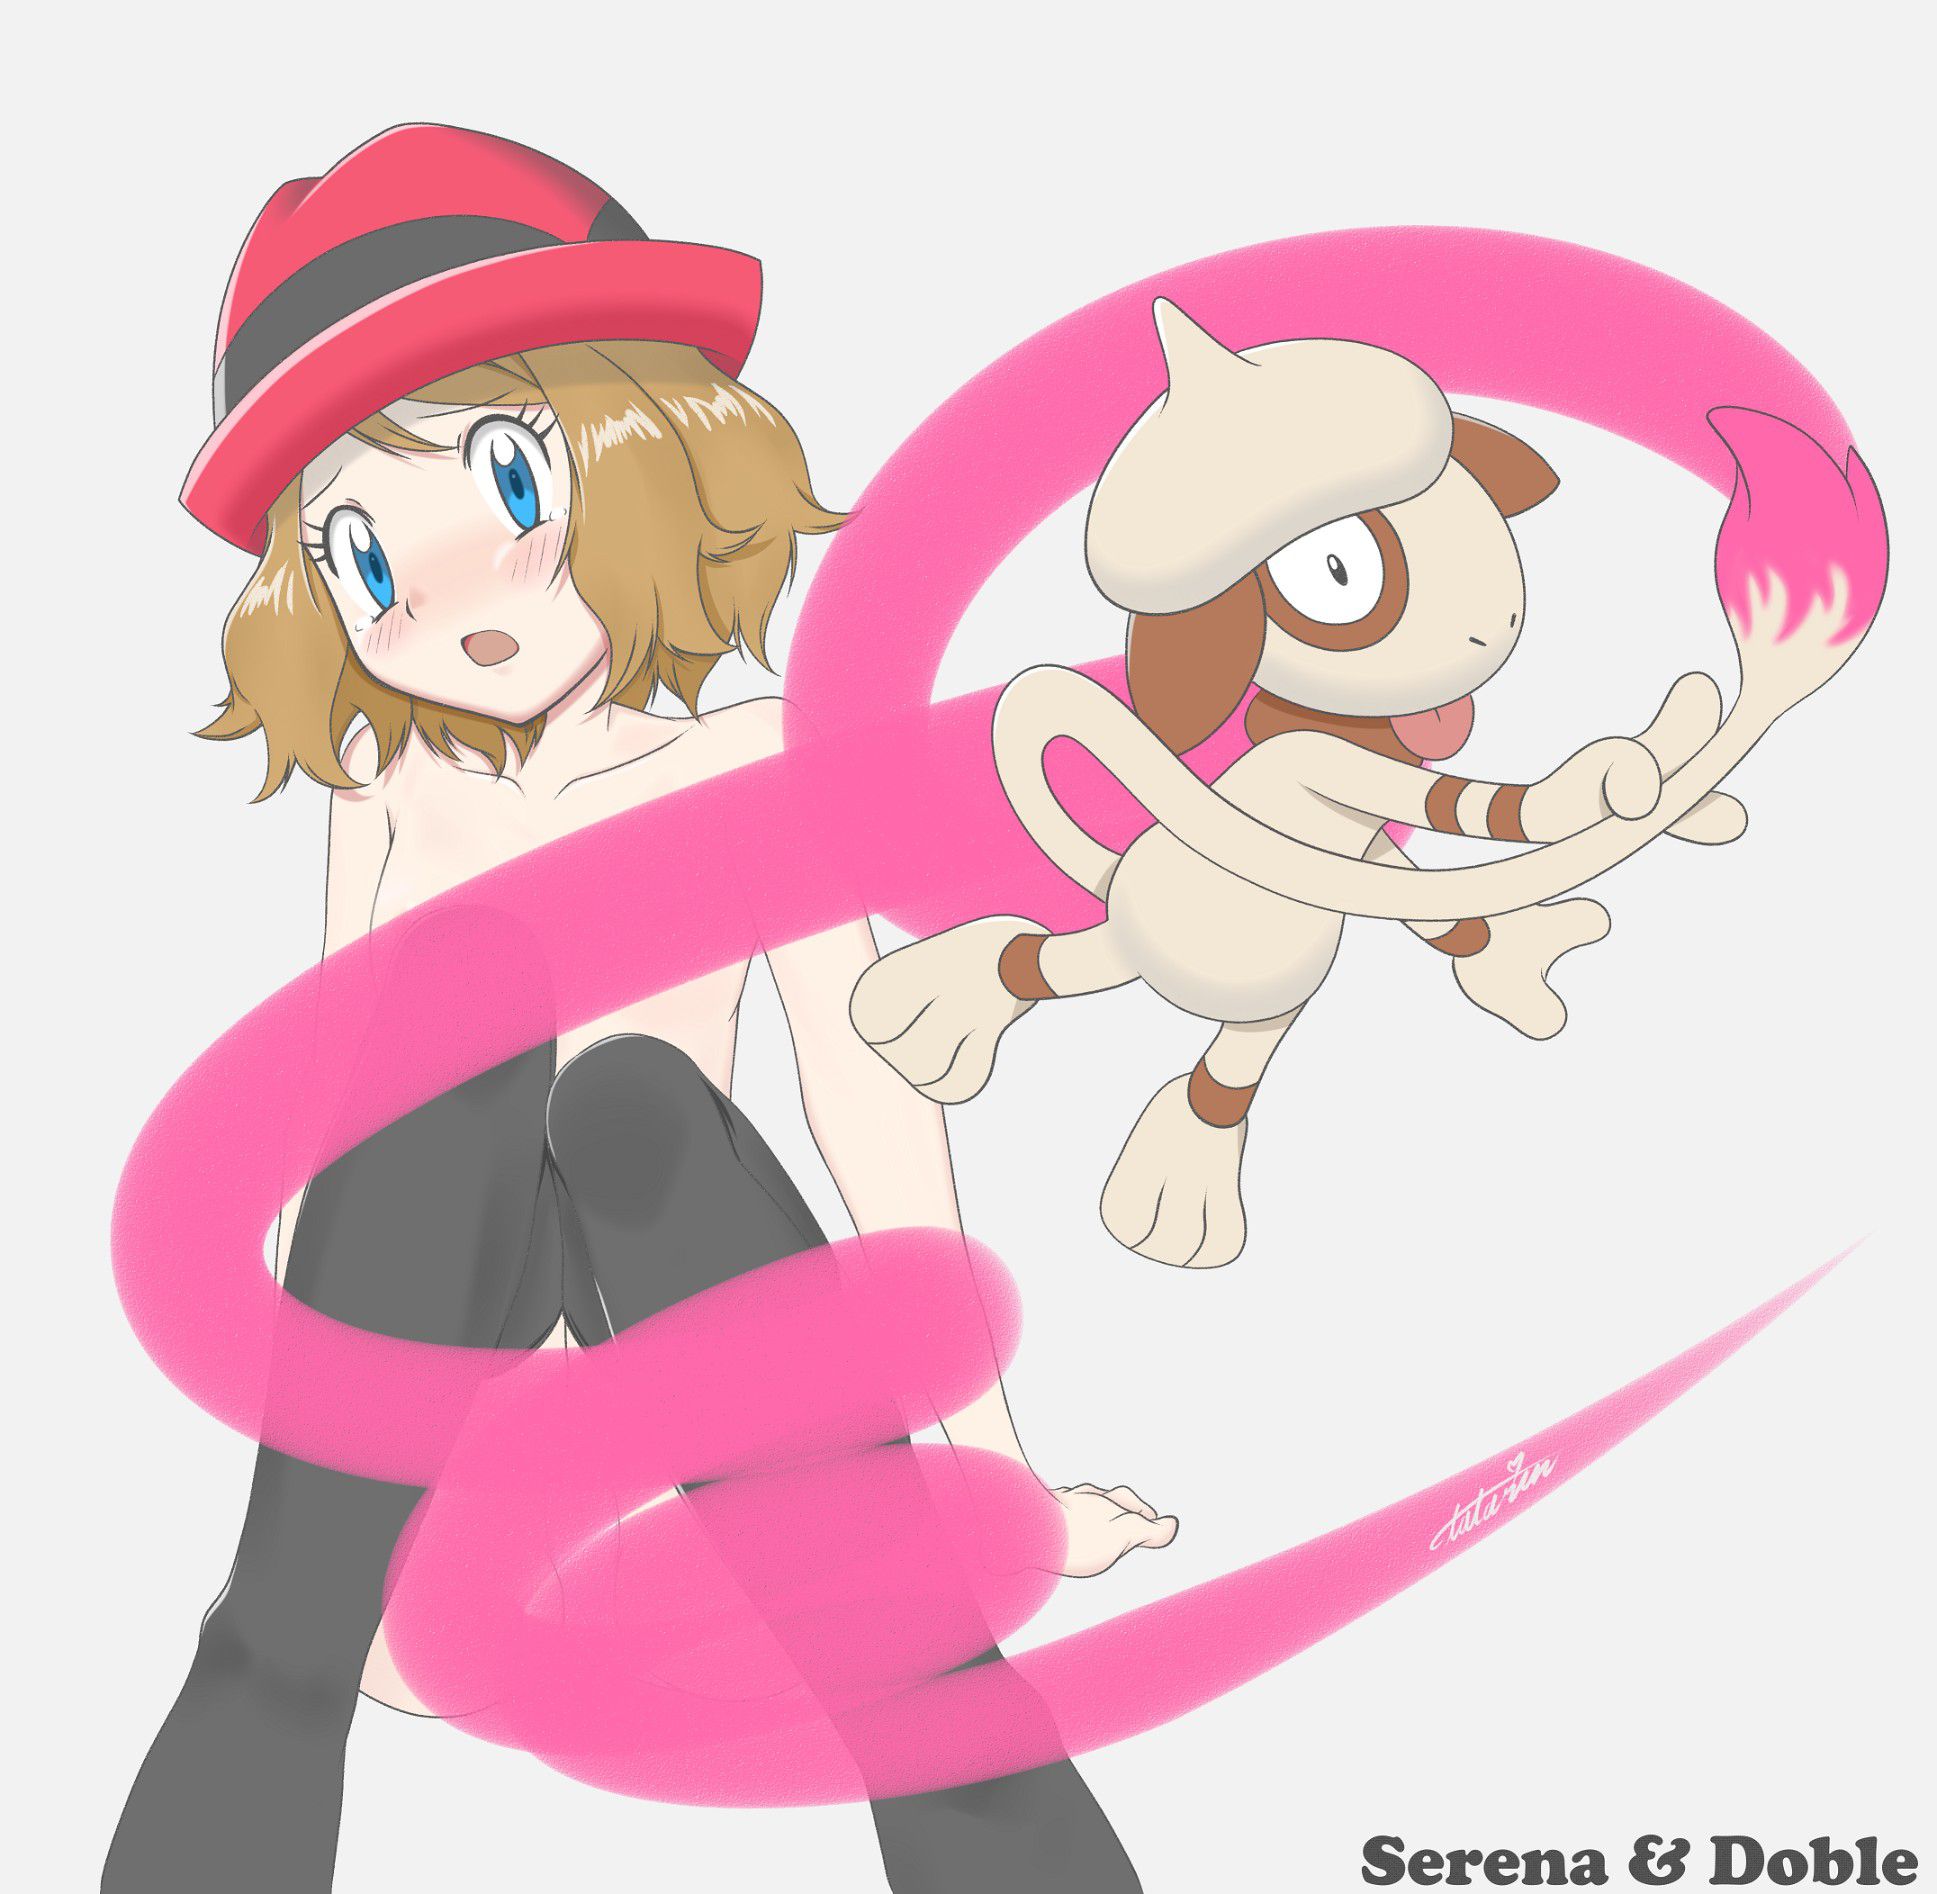 【Pocket Monsters】Erotic image that sticks through with Serena's etch 6